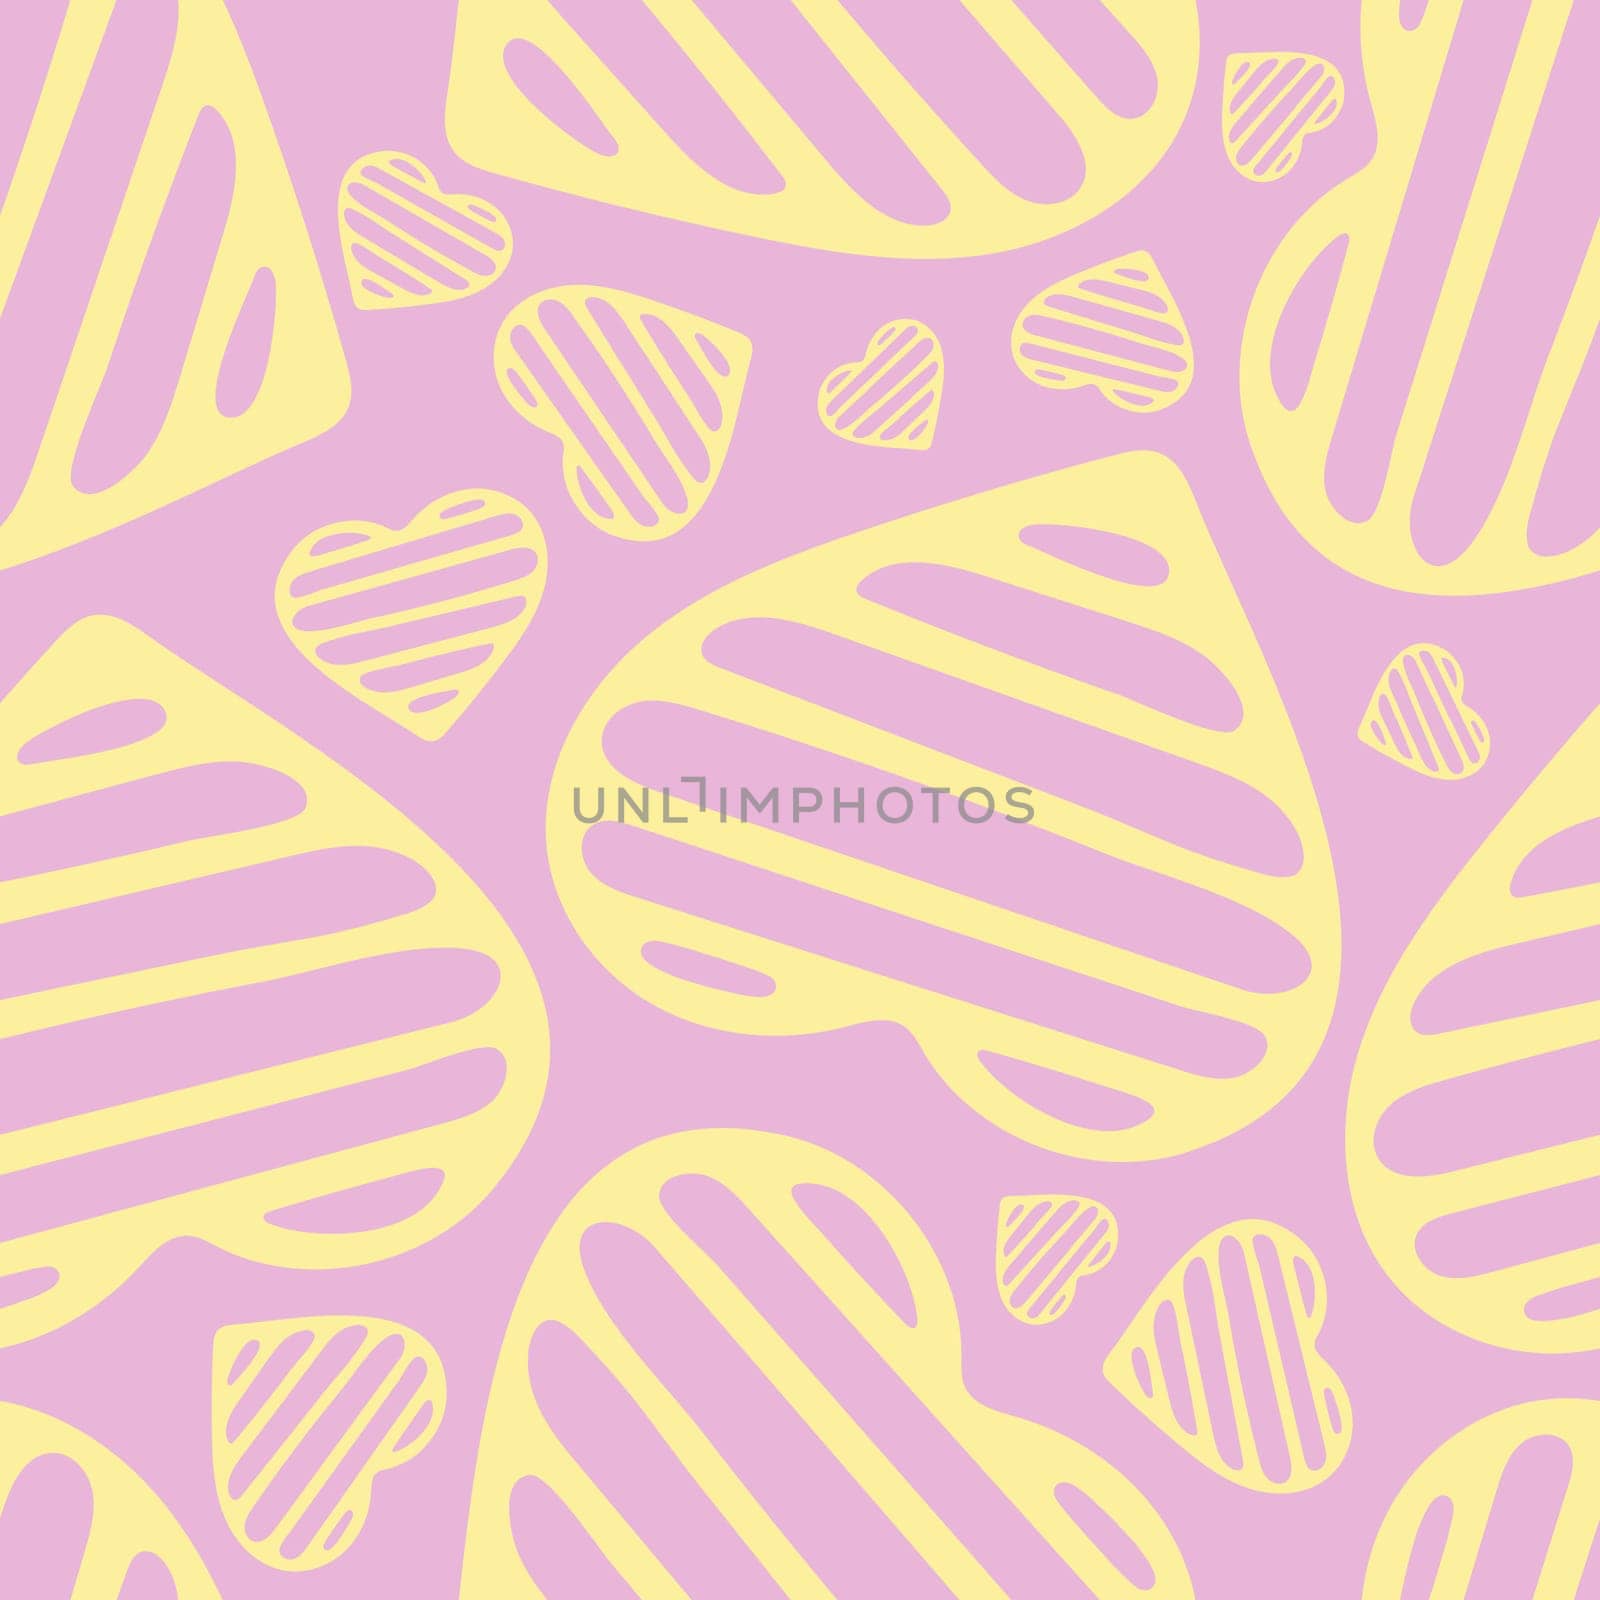 Hand Drawn Seamless Patterns with Hearts in Doodle Style. Romantic Love Digital Paper for Valentines Day. Colorful Hearts on Pastel Pale Pink Background.